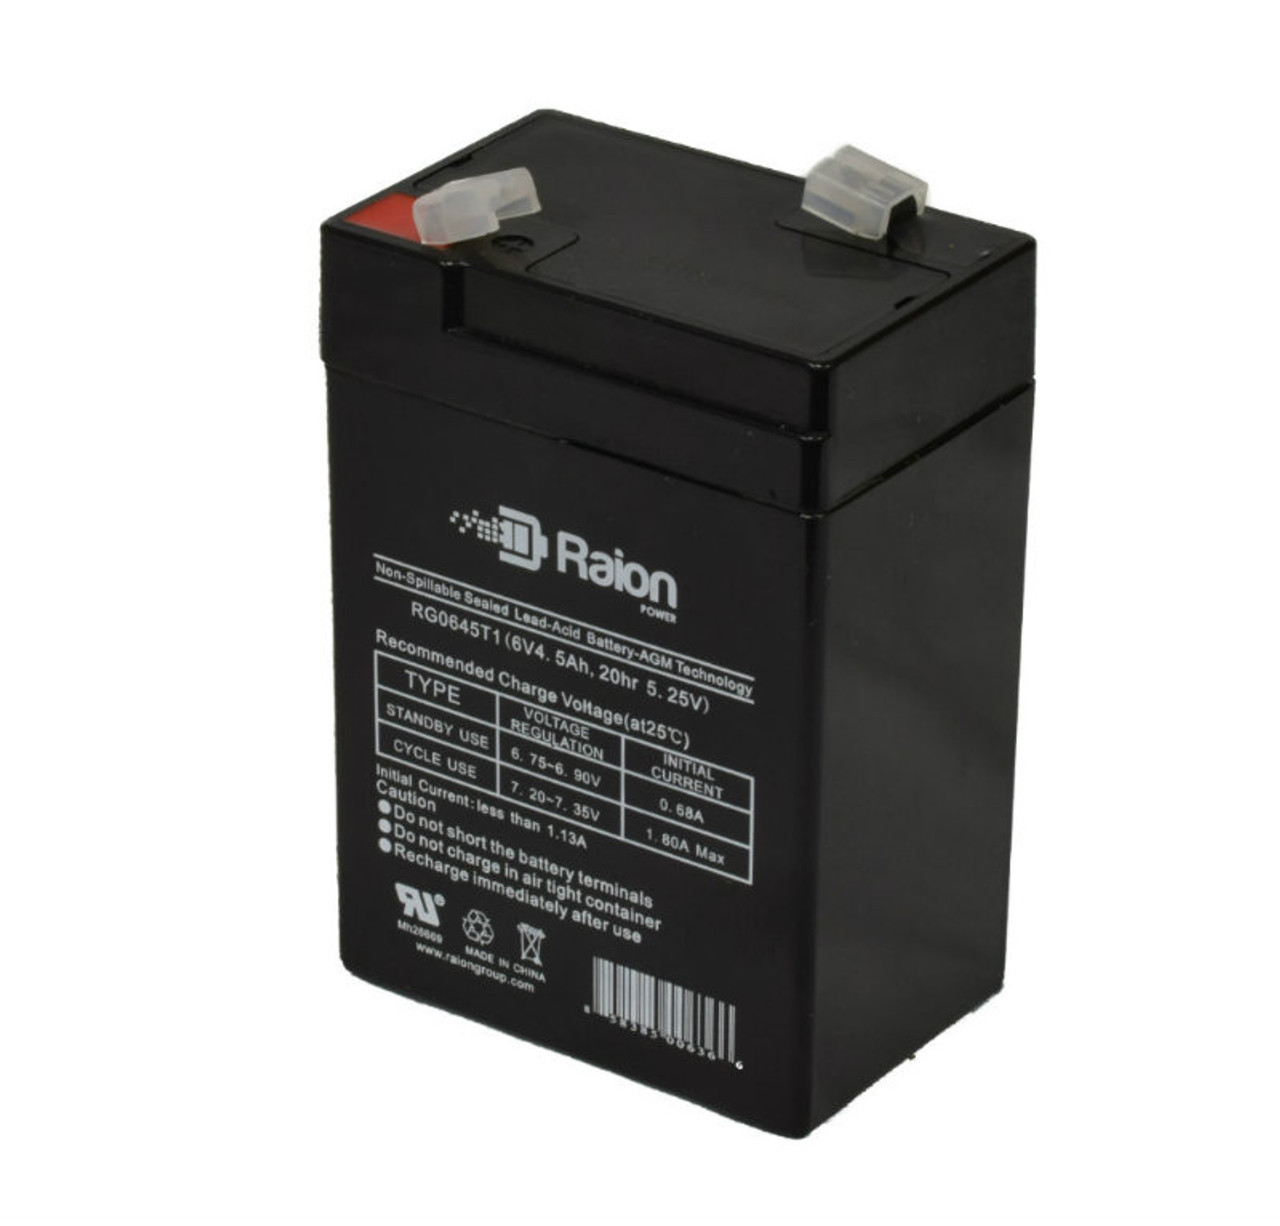 Raion Power RG0645T1 6V 4.5Ah Replacement Battery Cartridge for Amstron AP-640F1